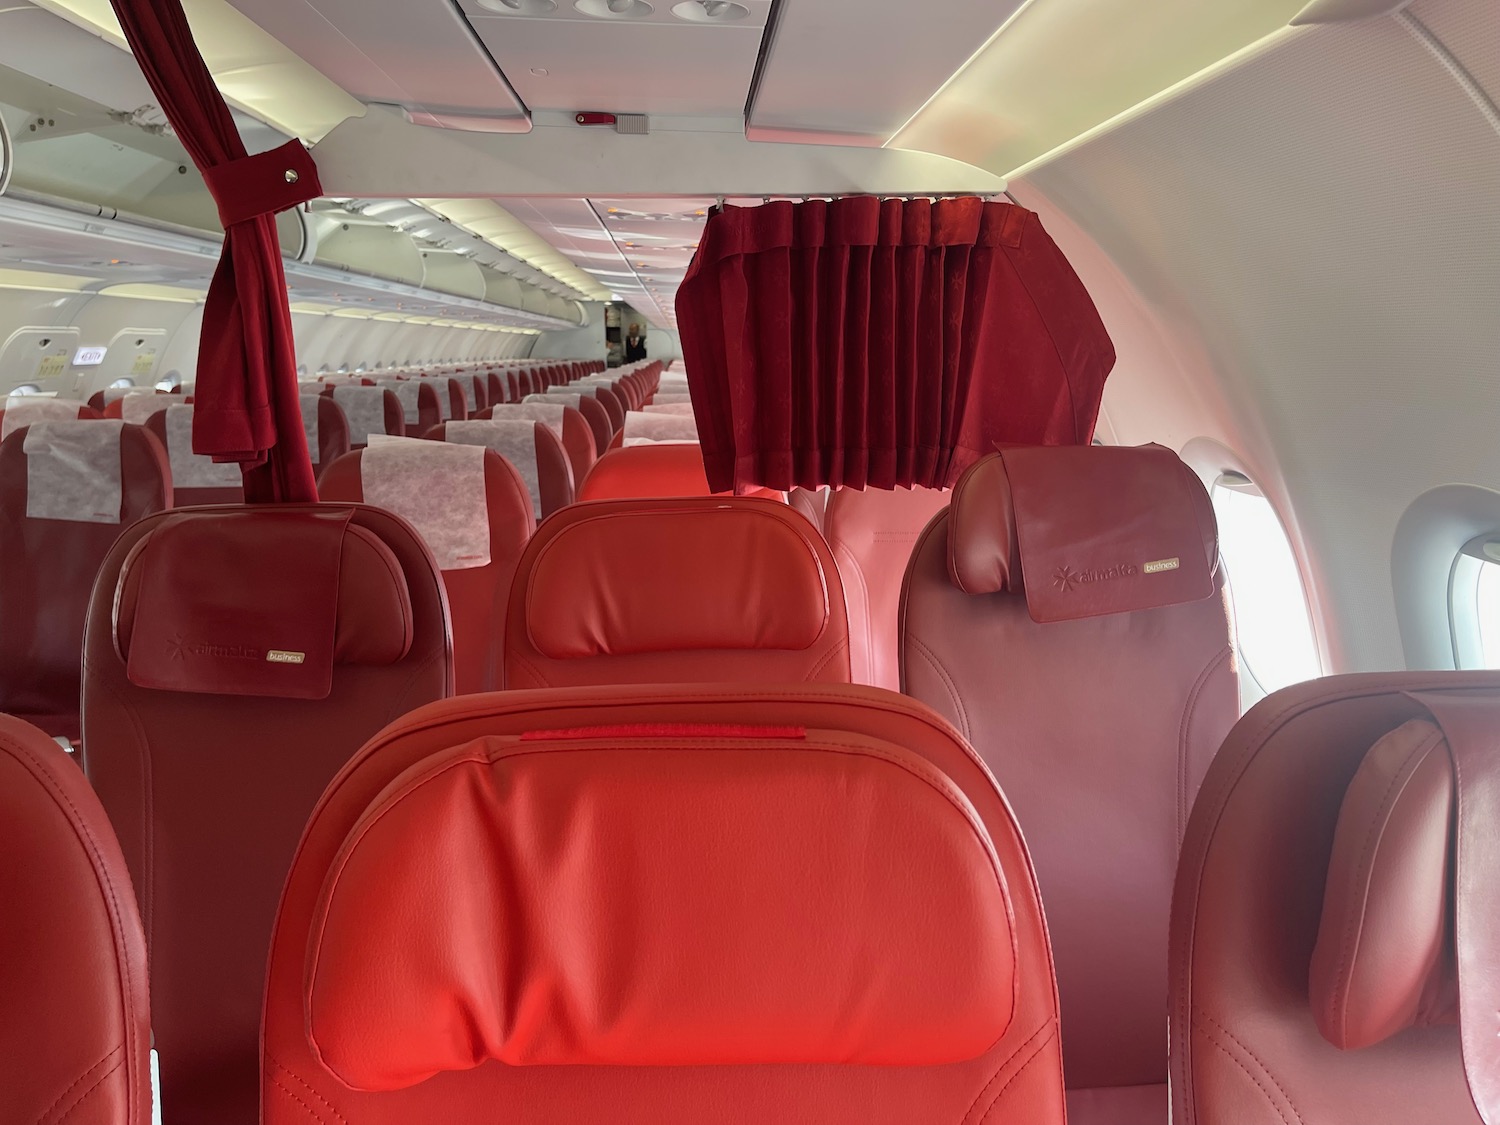 the inside of an airplane with red seats